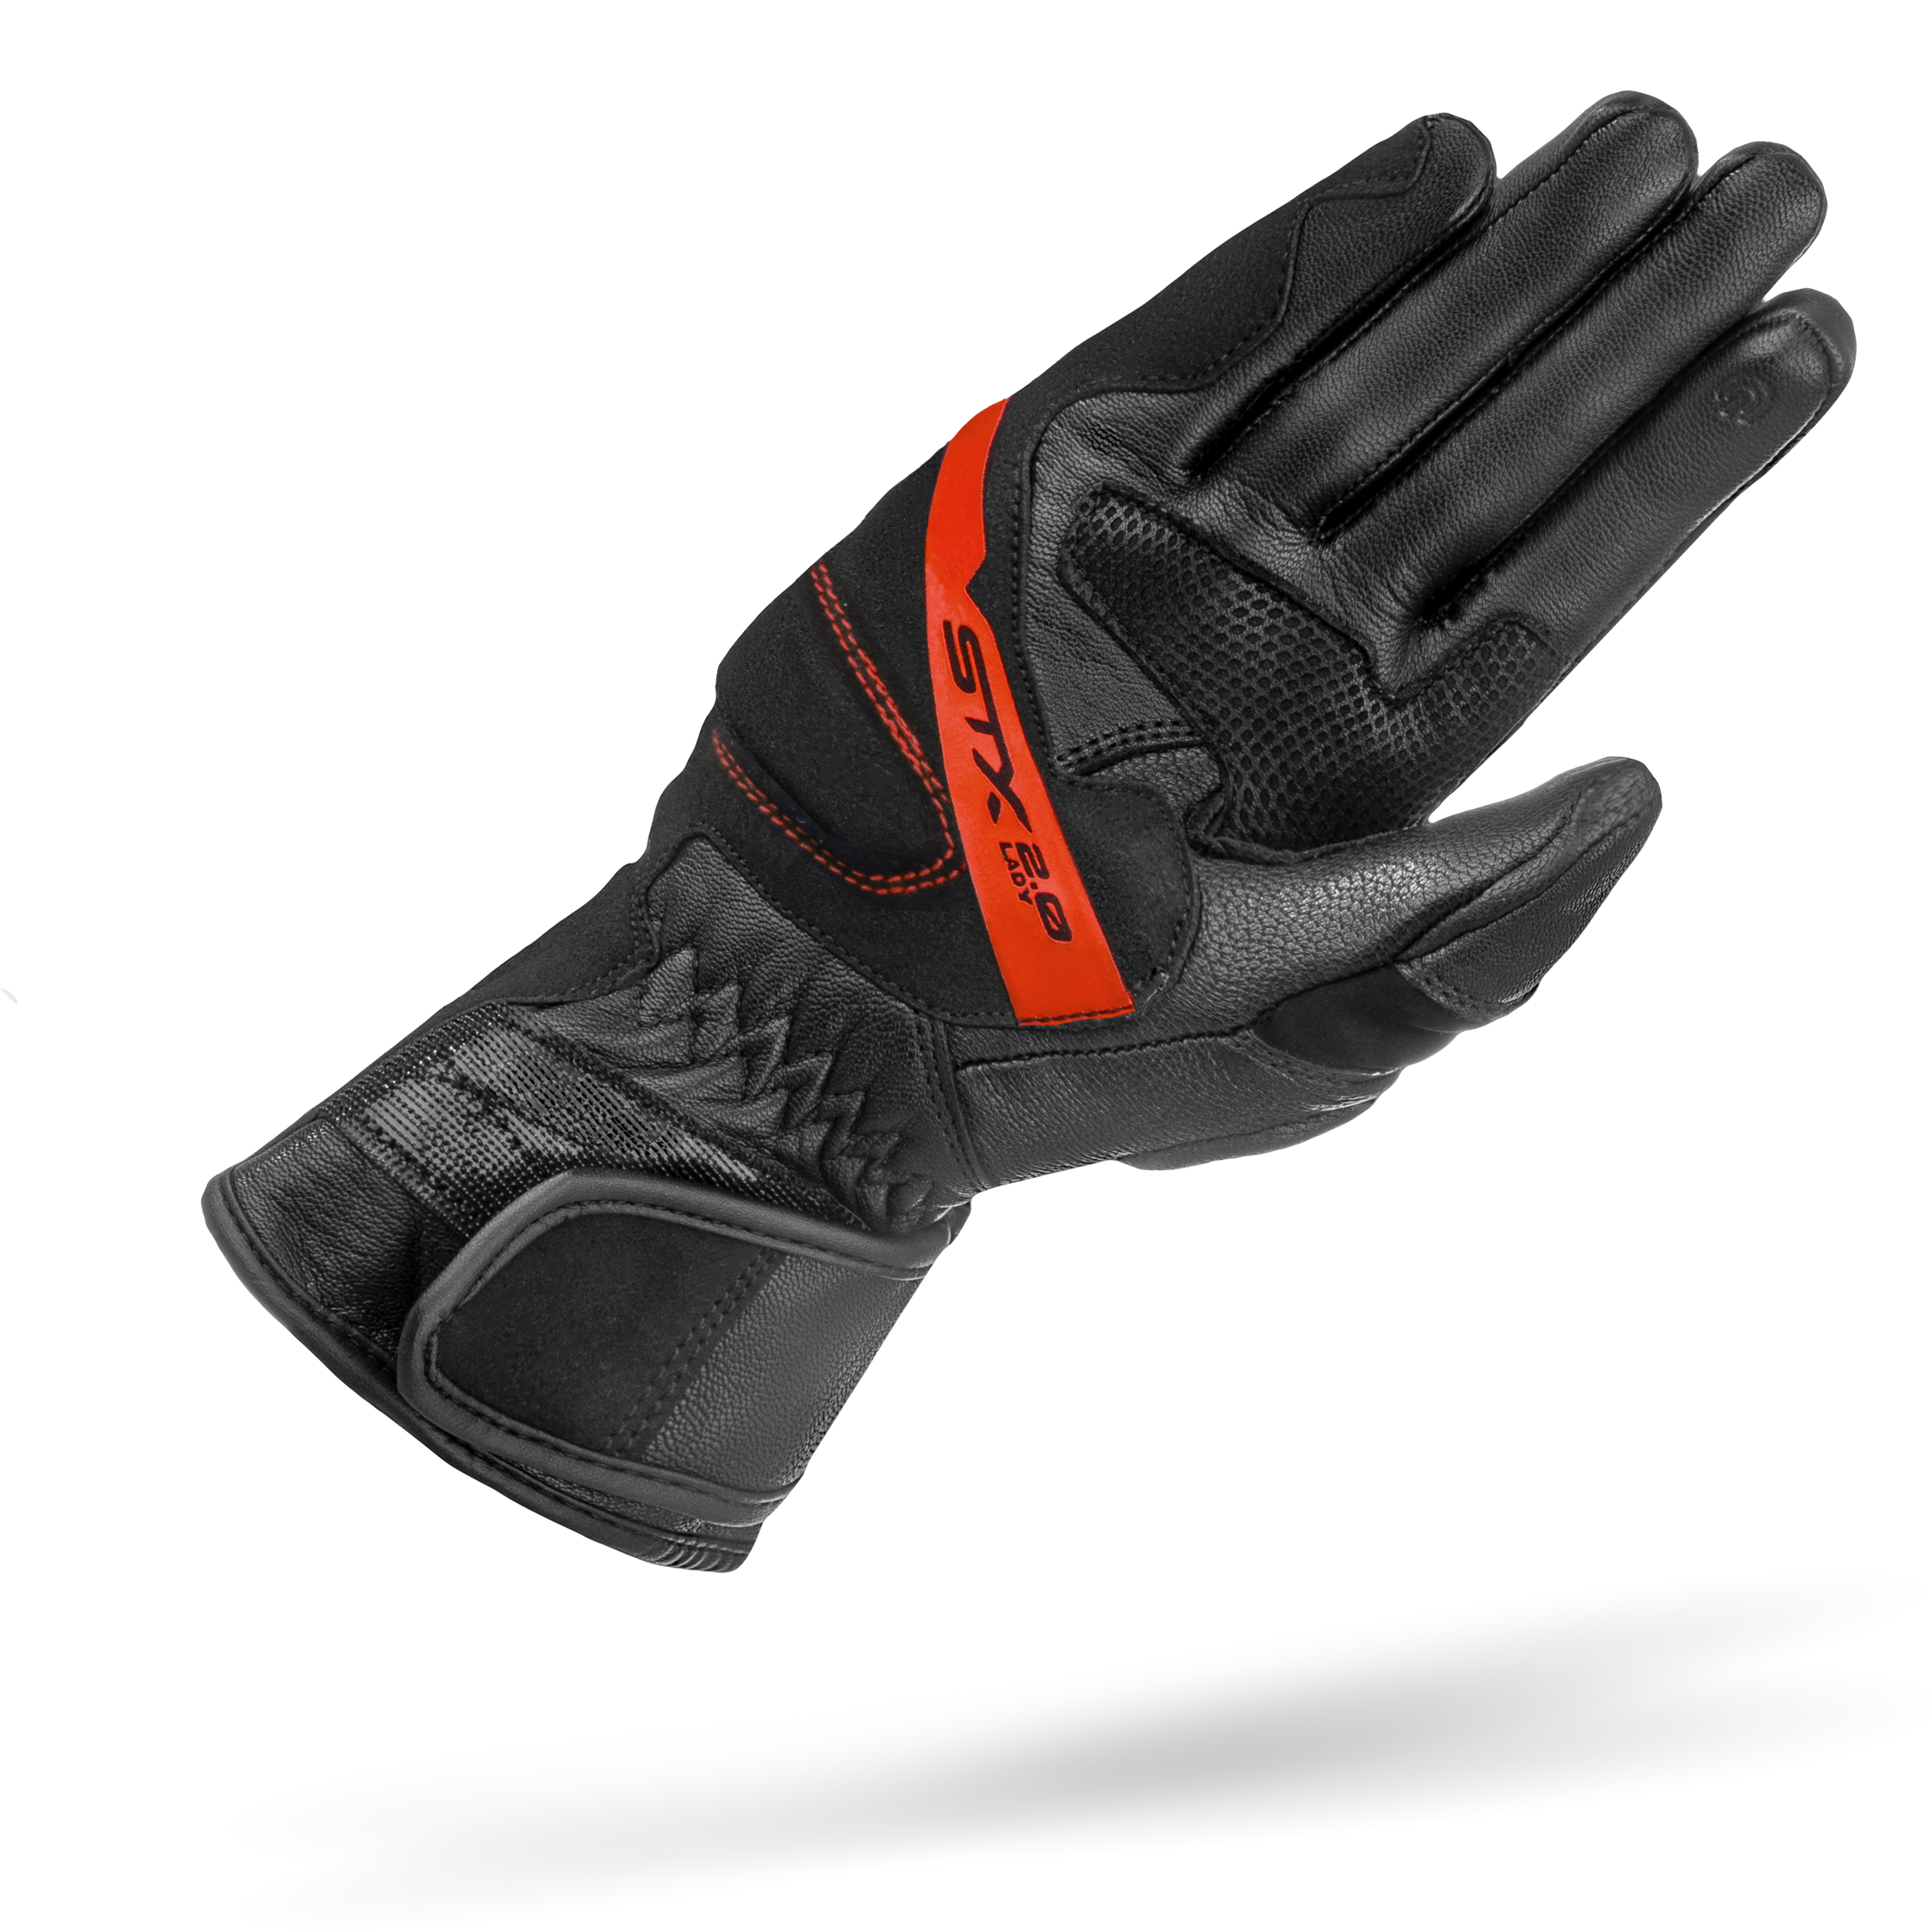 The palm of Black and RED women&#39;s leather motorcycle glove STX from SHIMA